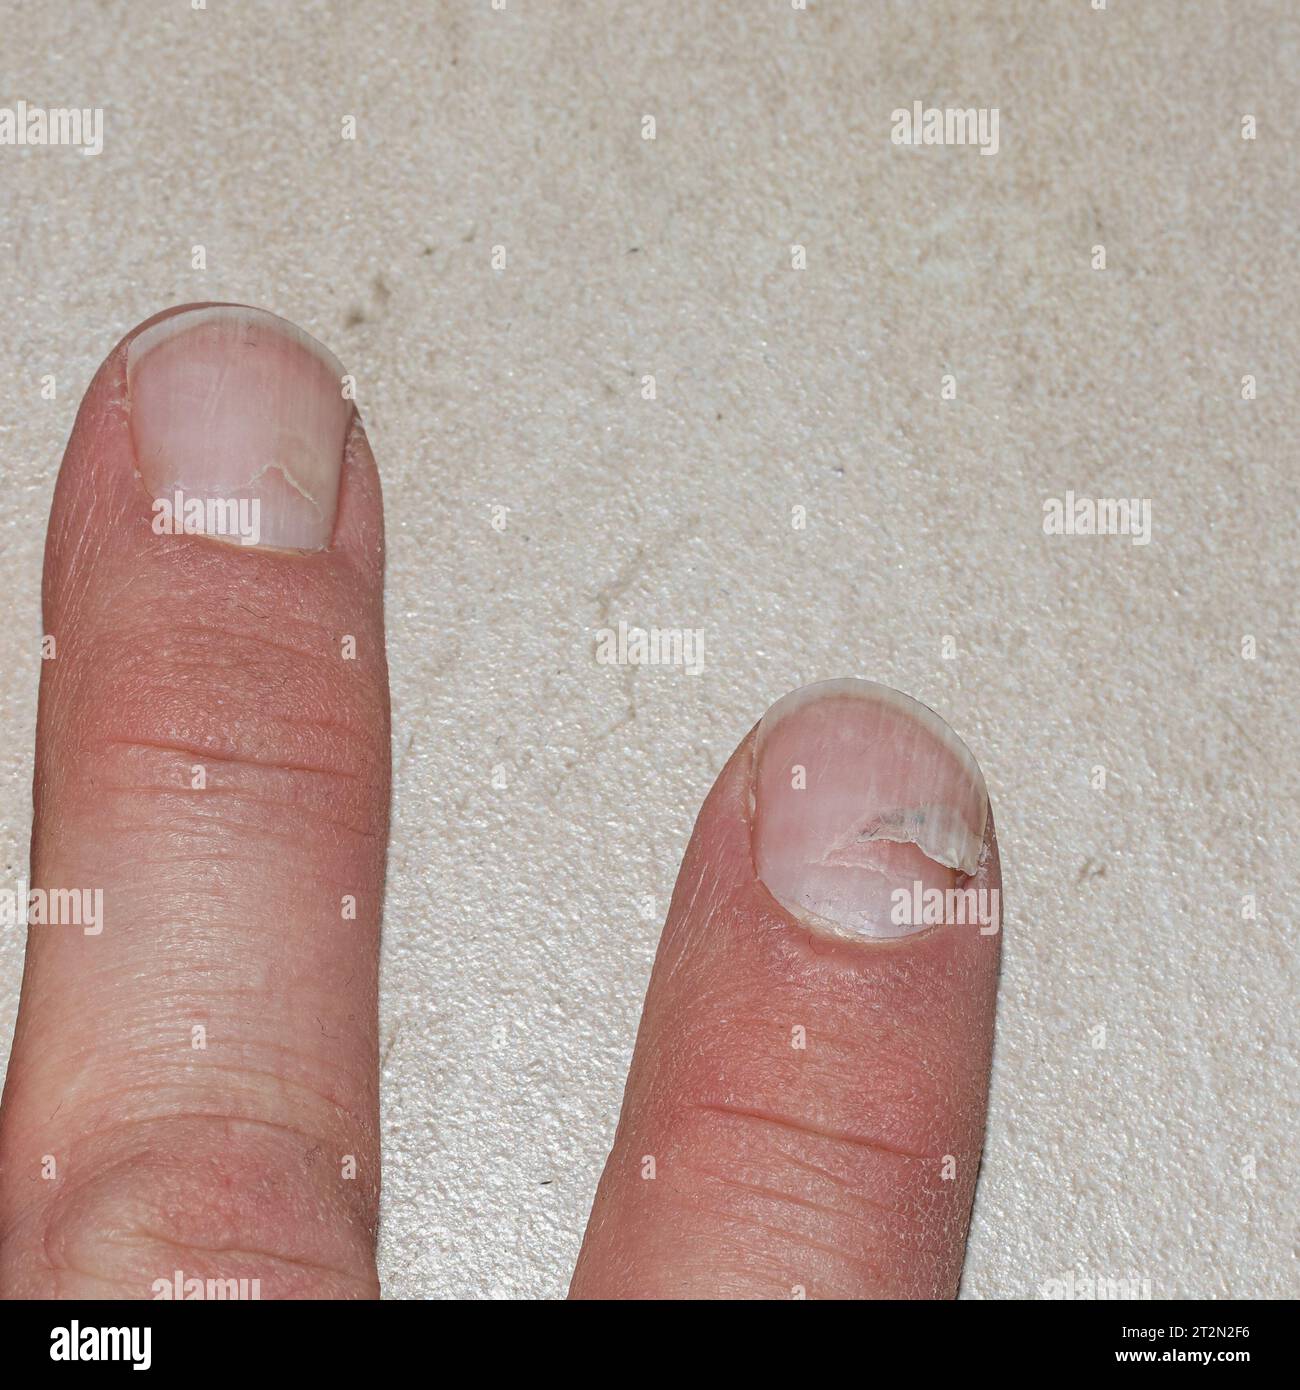 A hand affected by scarlet fever, revealing the resilience of the nails as they heal from the condition Stock Photo